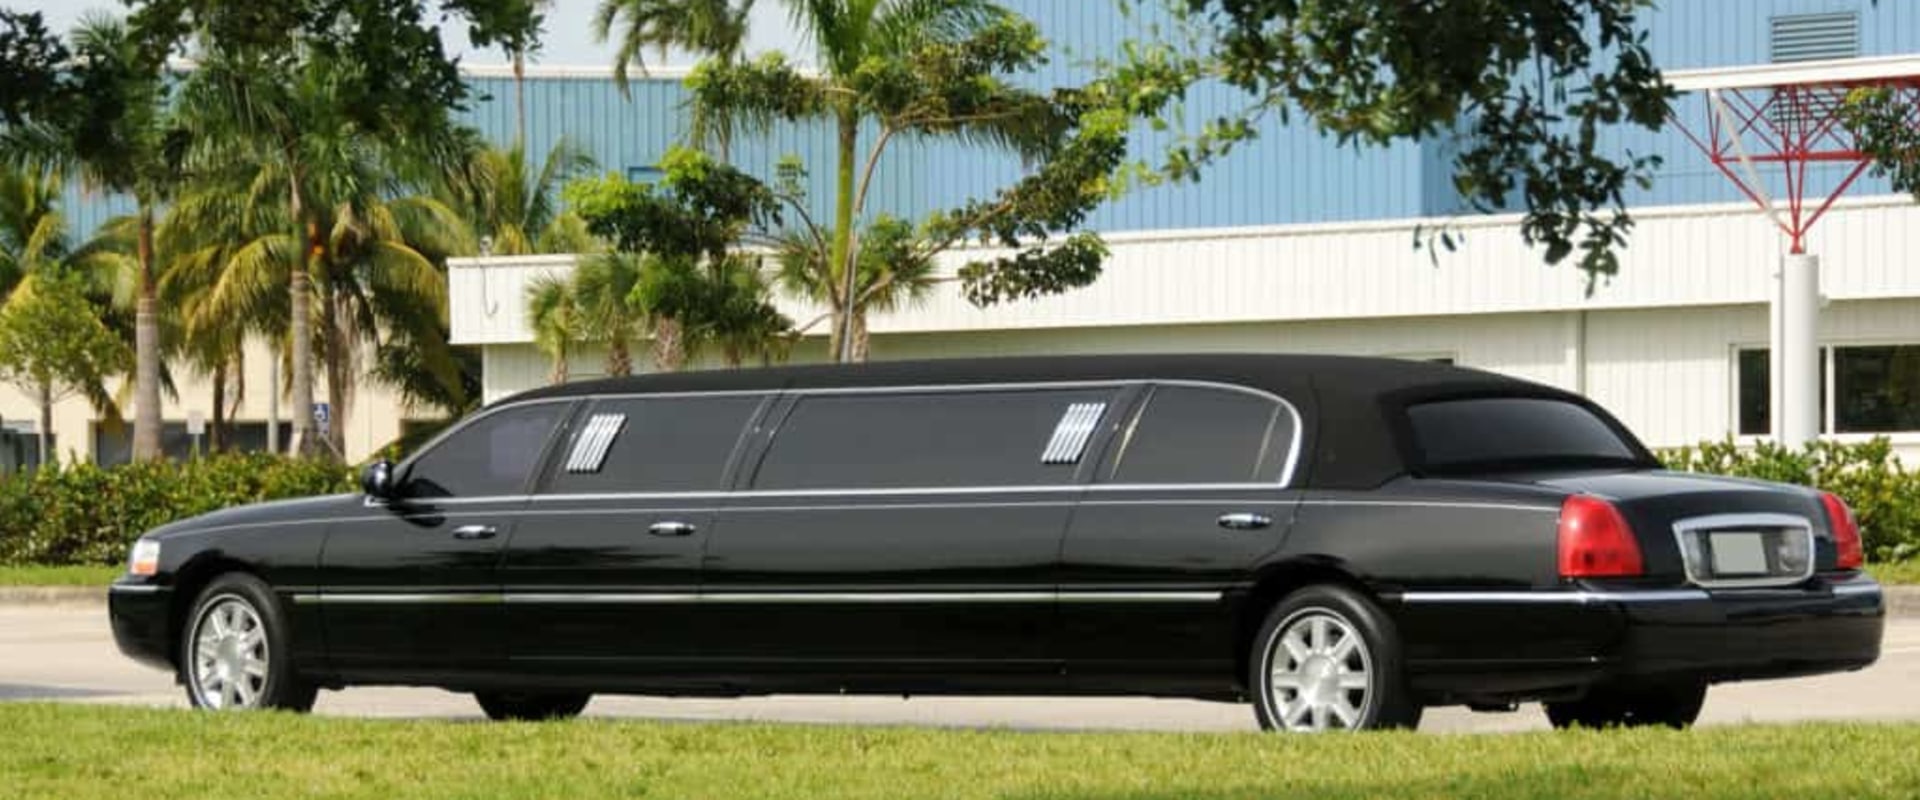 Are limousines out of style?